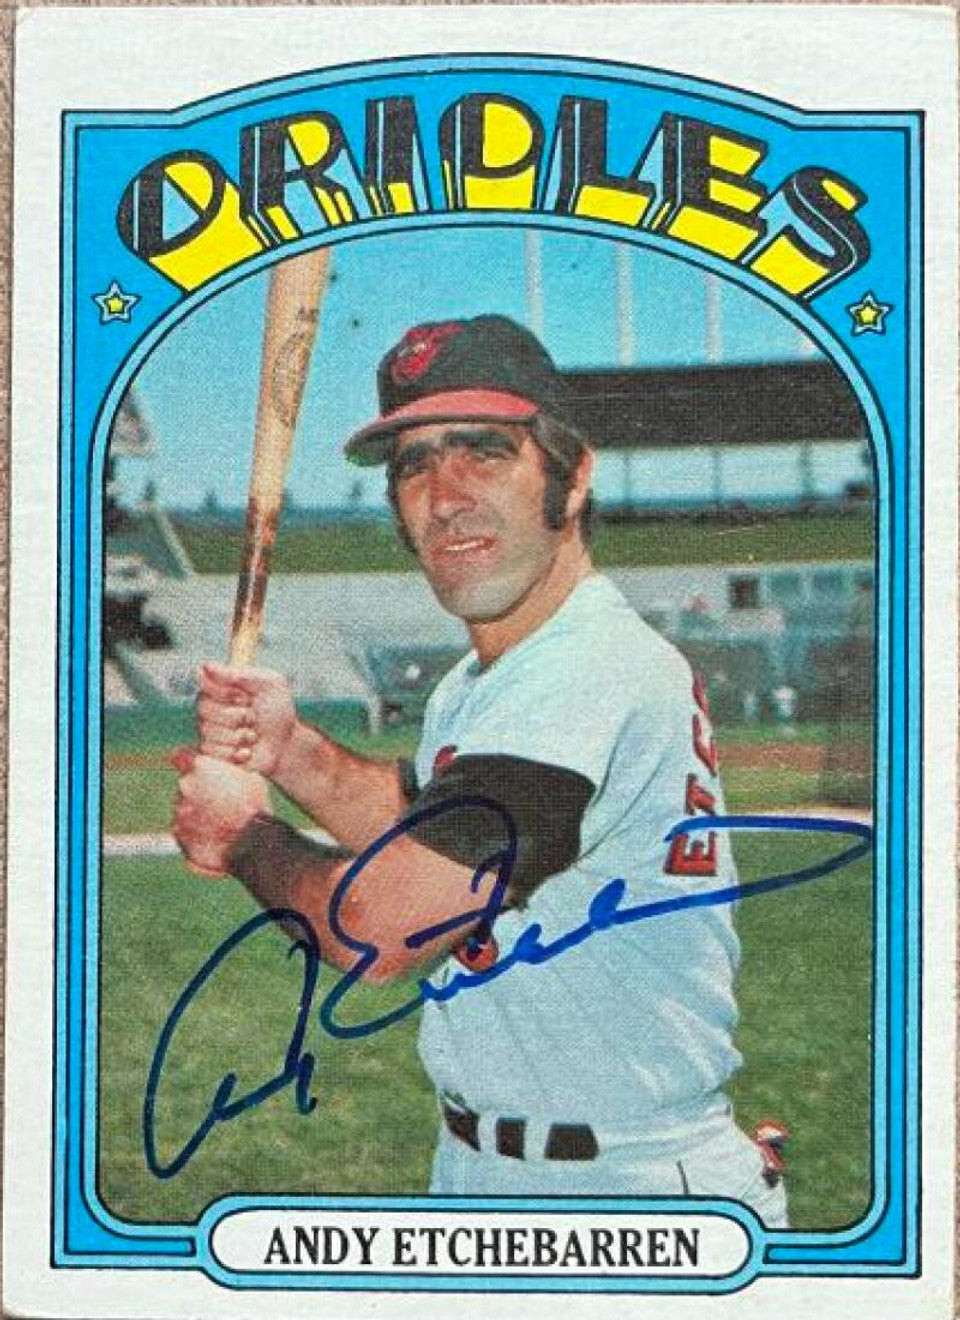 Andy Etchebarren Signed 1972 Topps Baseball Card - Baltimore Orioles